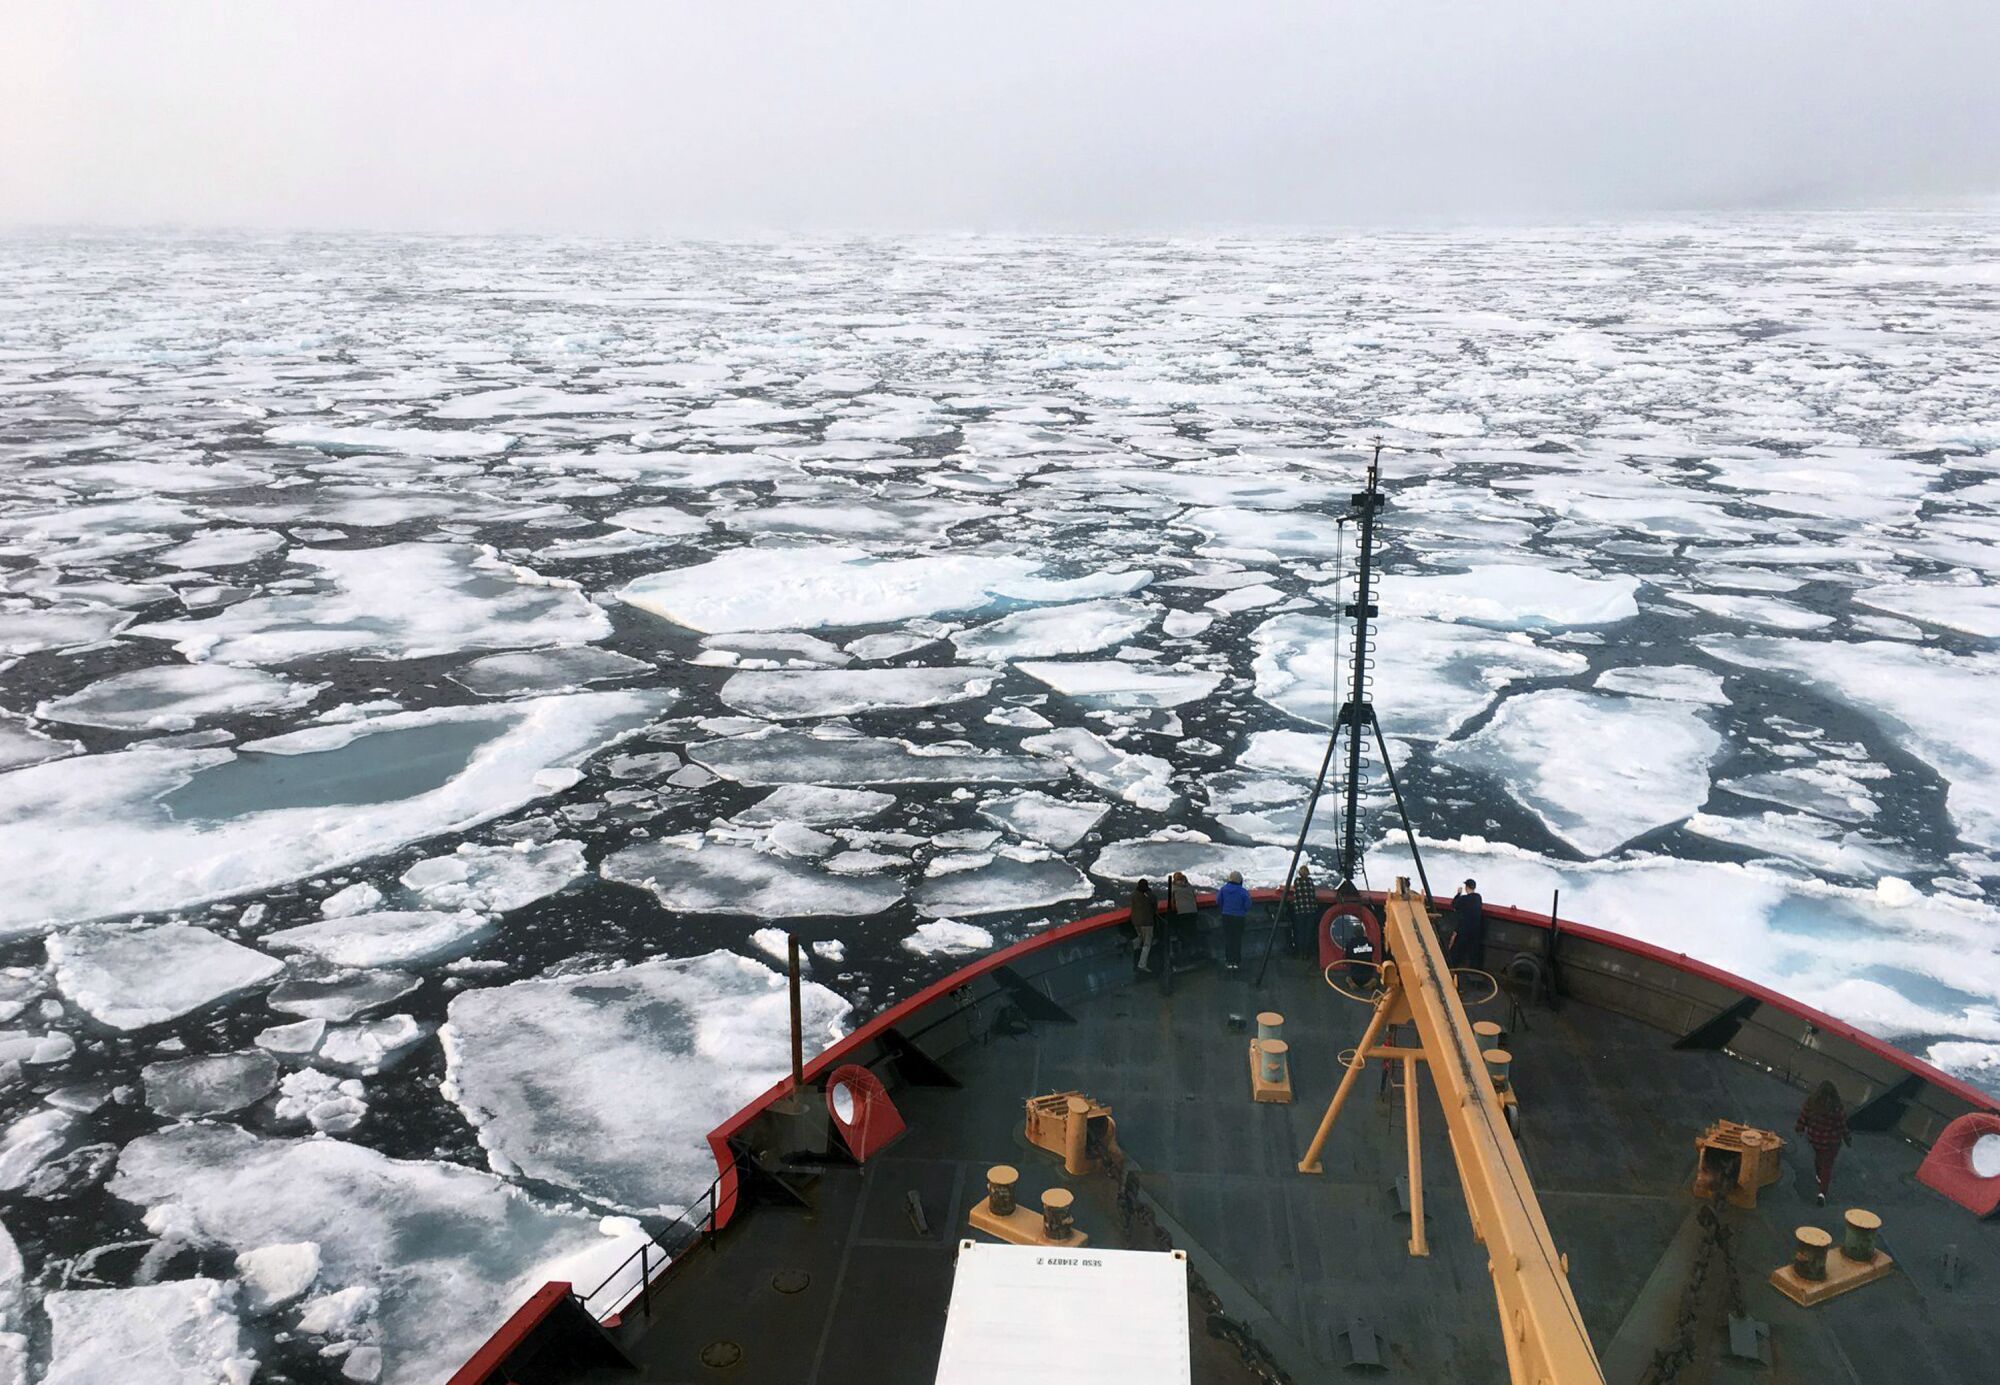 The bow of an icebreaking ship heading through a field of sea ice